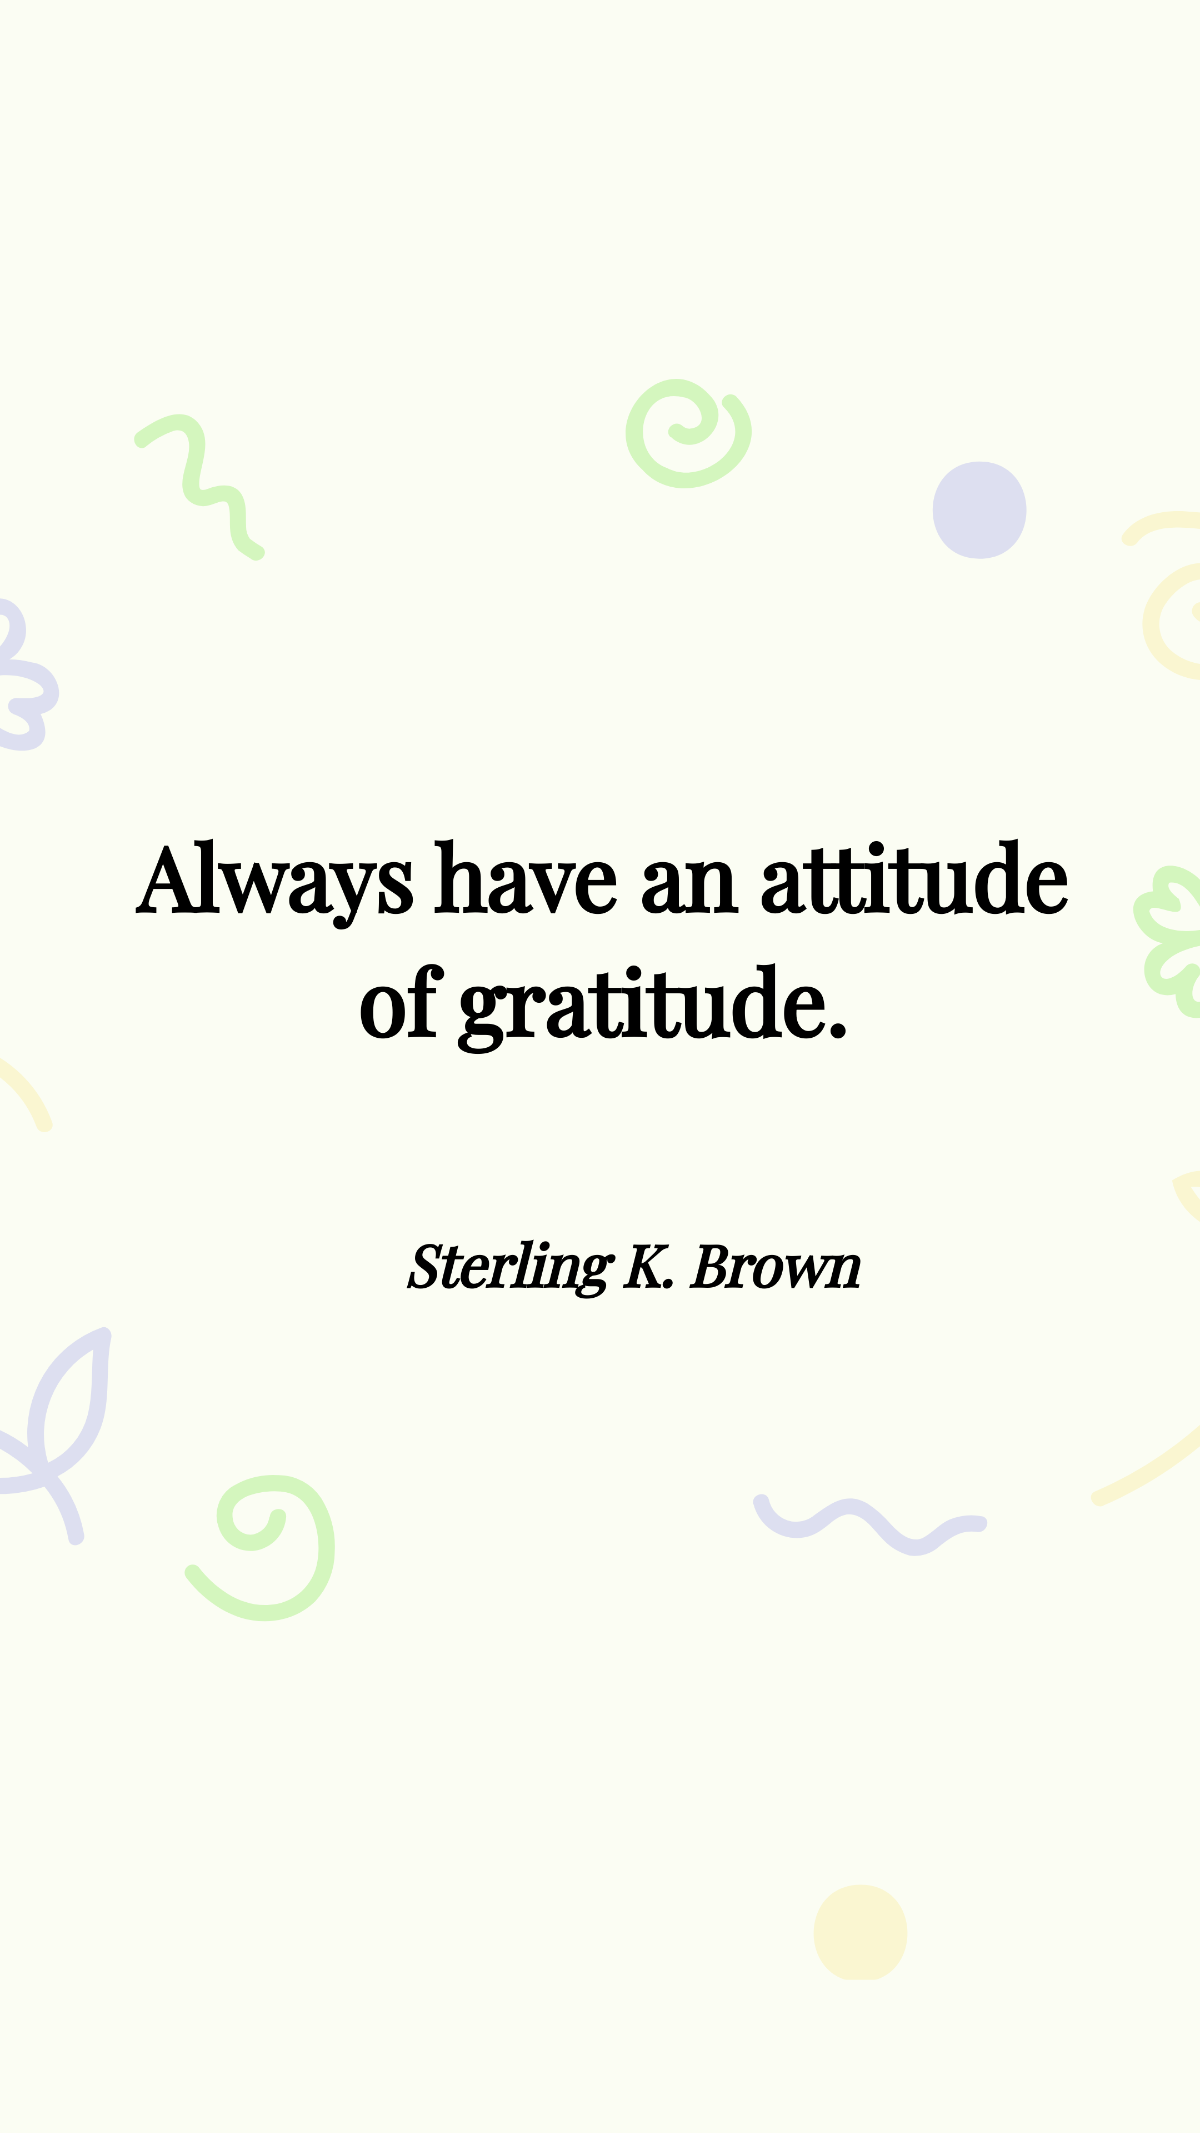 Free Sterling K. Brown - Always have an attitude of gratitude. Template